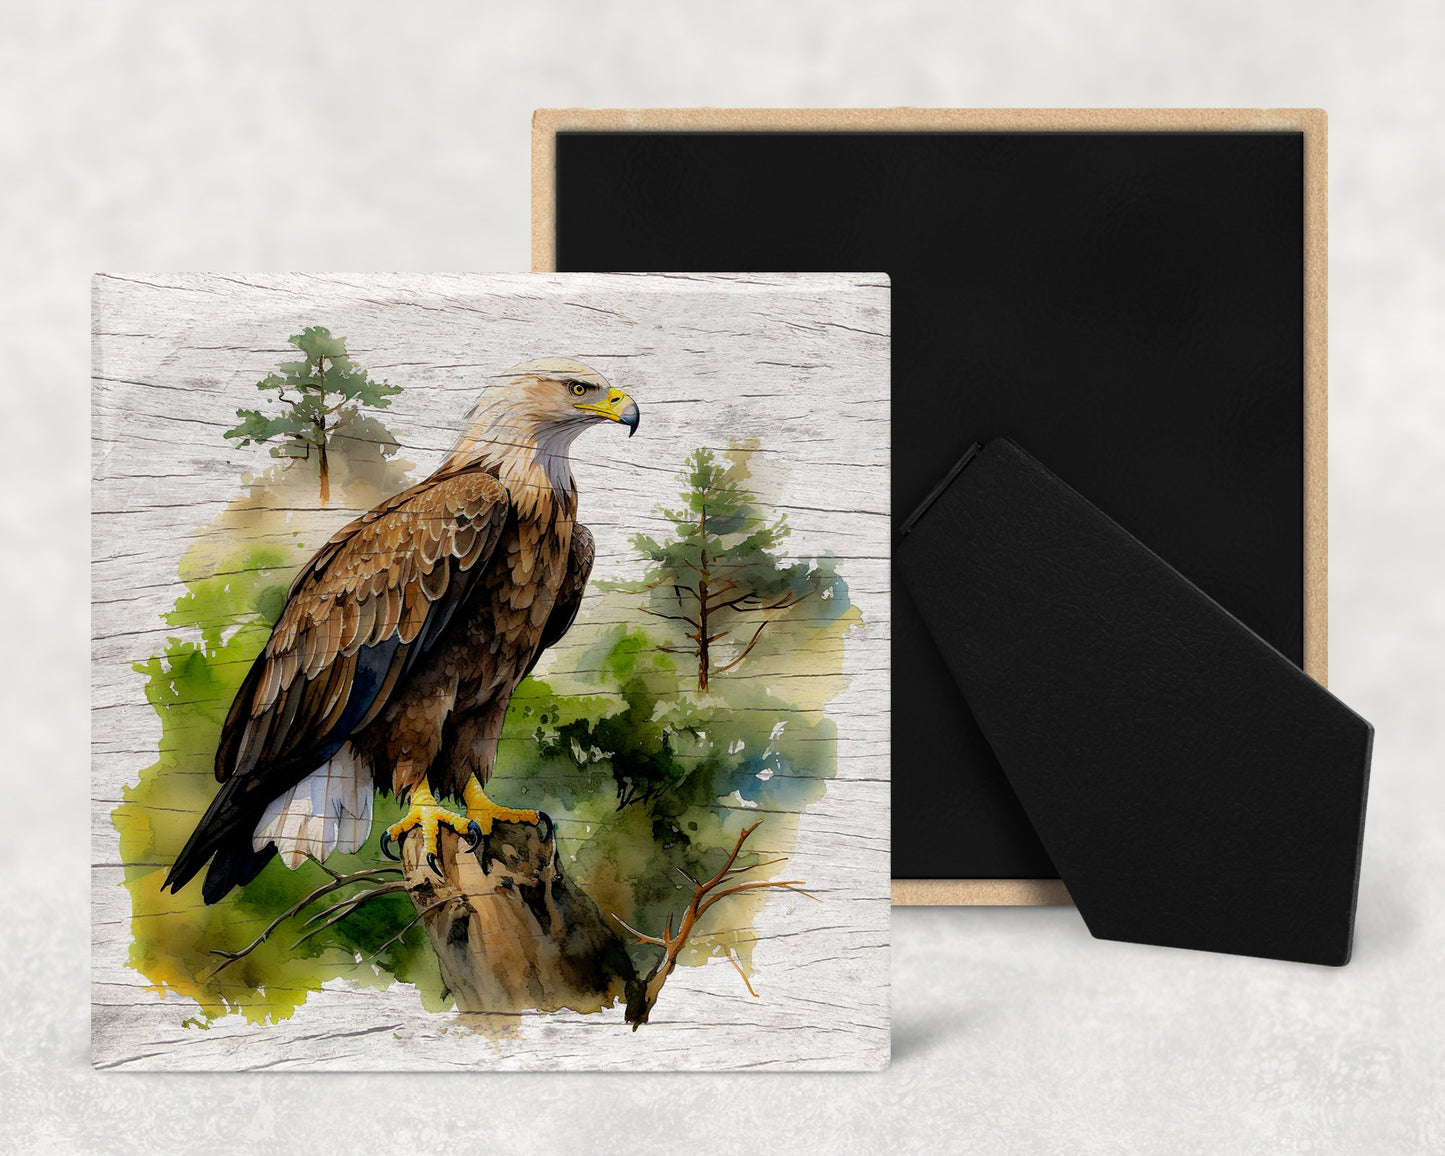 Watercolor Bald Eagle on Wood Texture Art Decorative Ceramic Tile with Optional Easel Back - Available in 3 Sizes